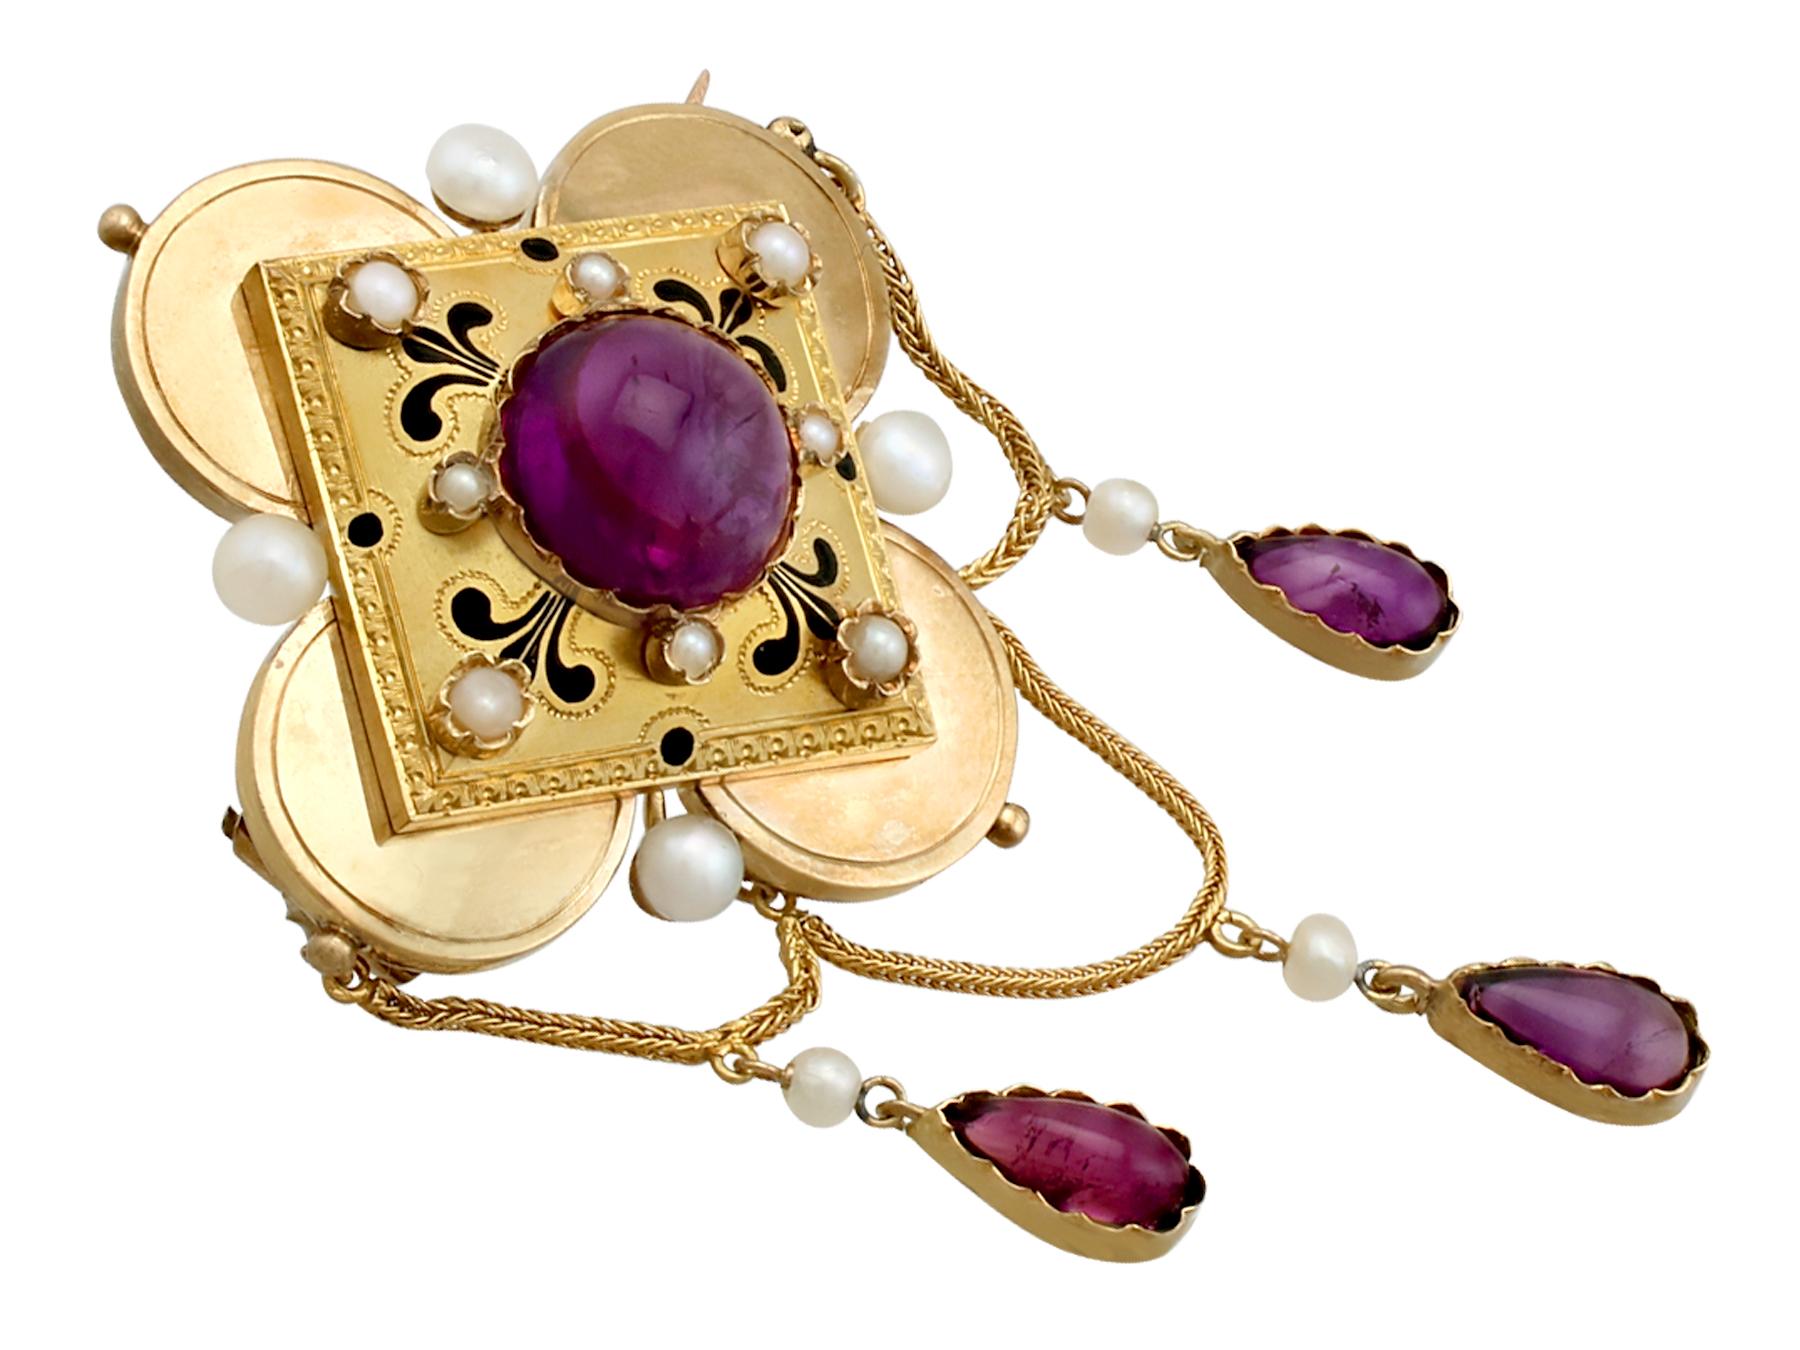 11.54 Carat Amethyst and Pearl Yellow Gold Jewelry Suite, Antique 1